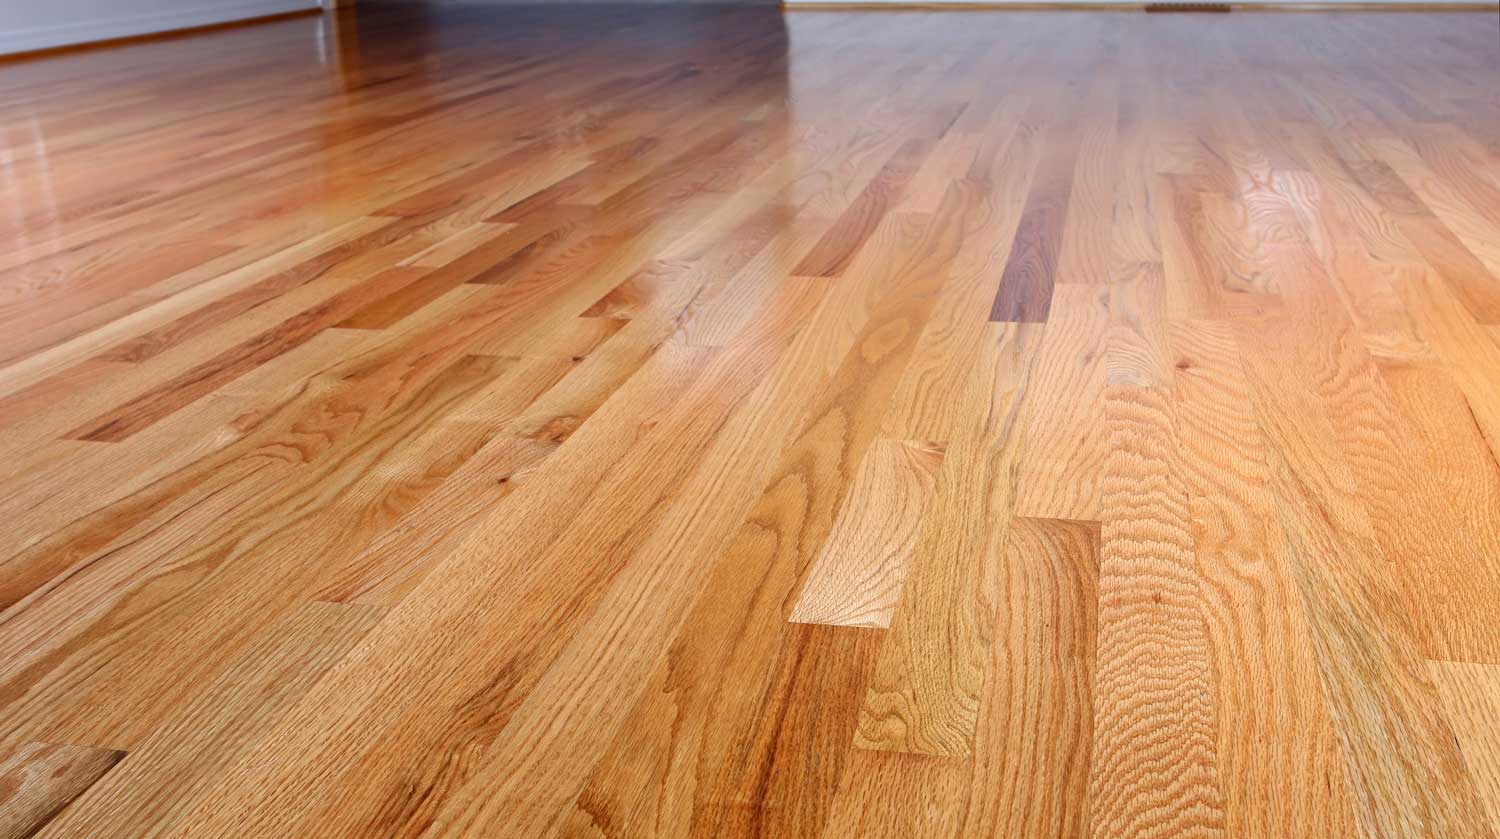 Cost To Refinish A Hardwood Floor, How Much Does It Cost To Refinish Hardwood Floors